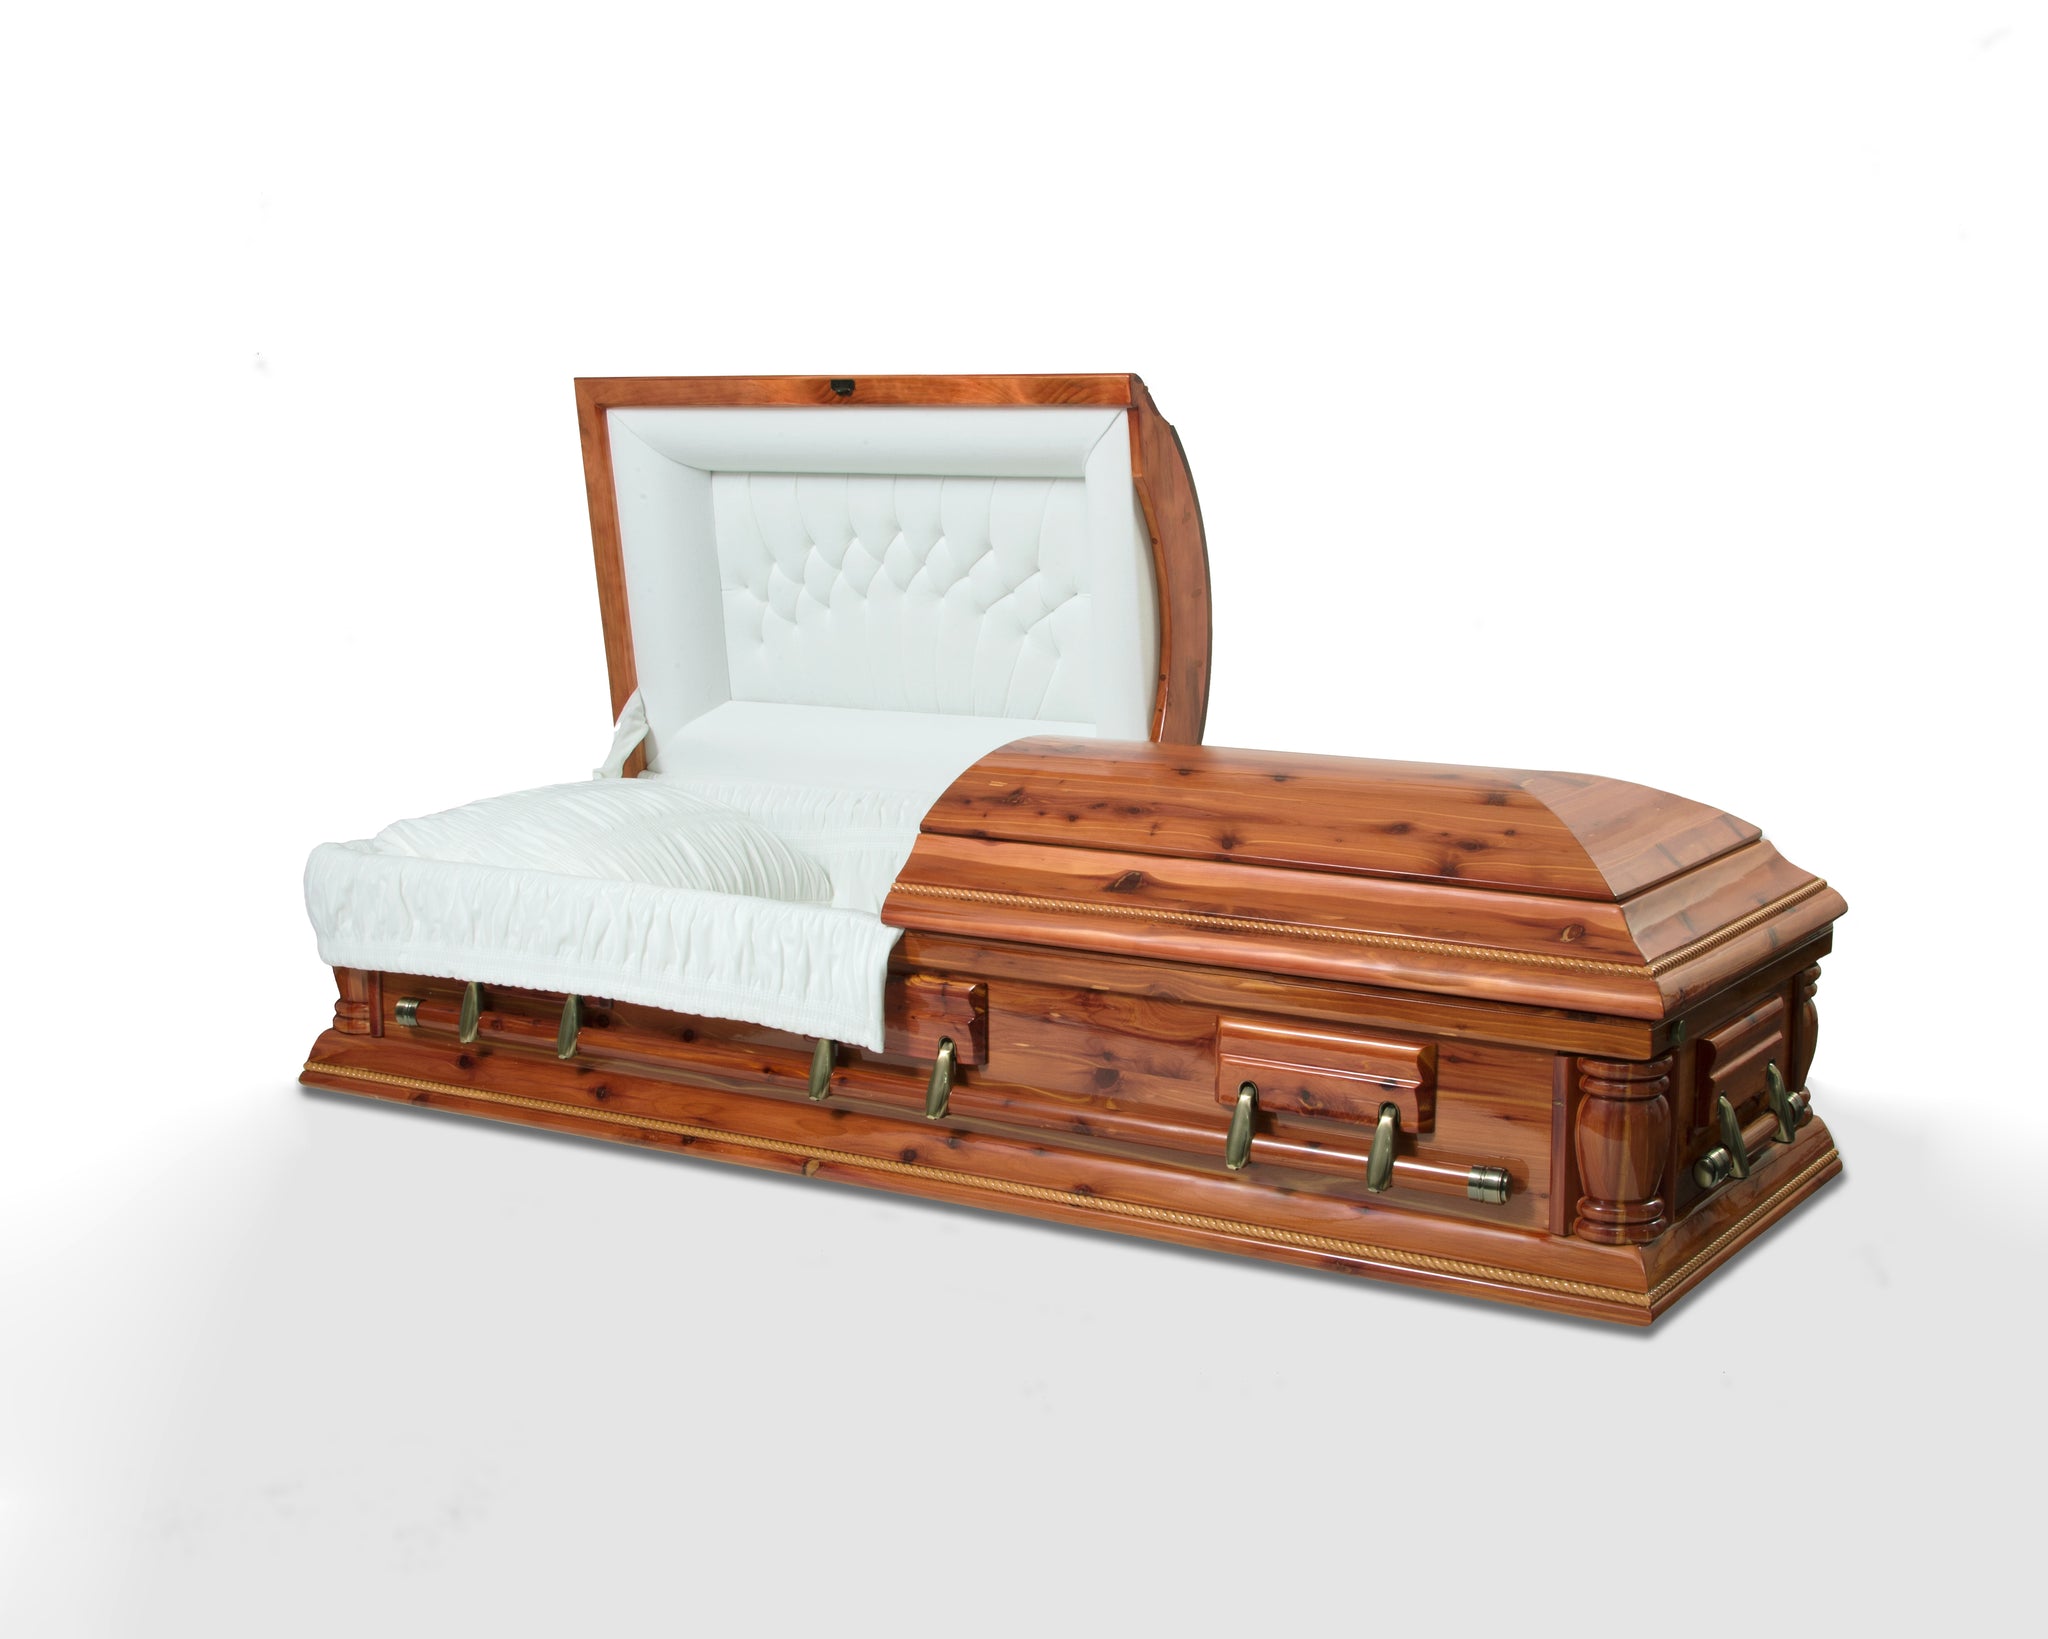 American cedar casket, with matte finish and natural wood grains exposed. Soft white velvet interior. 